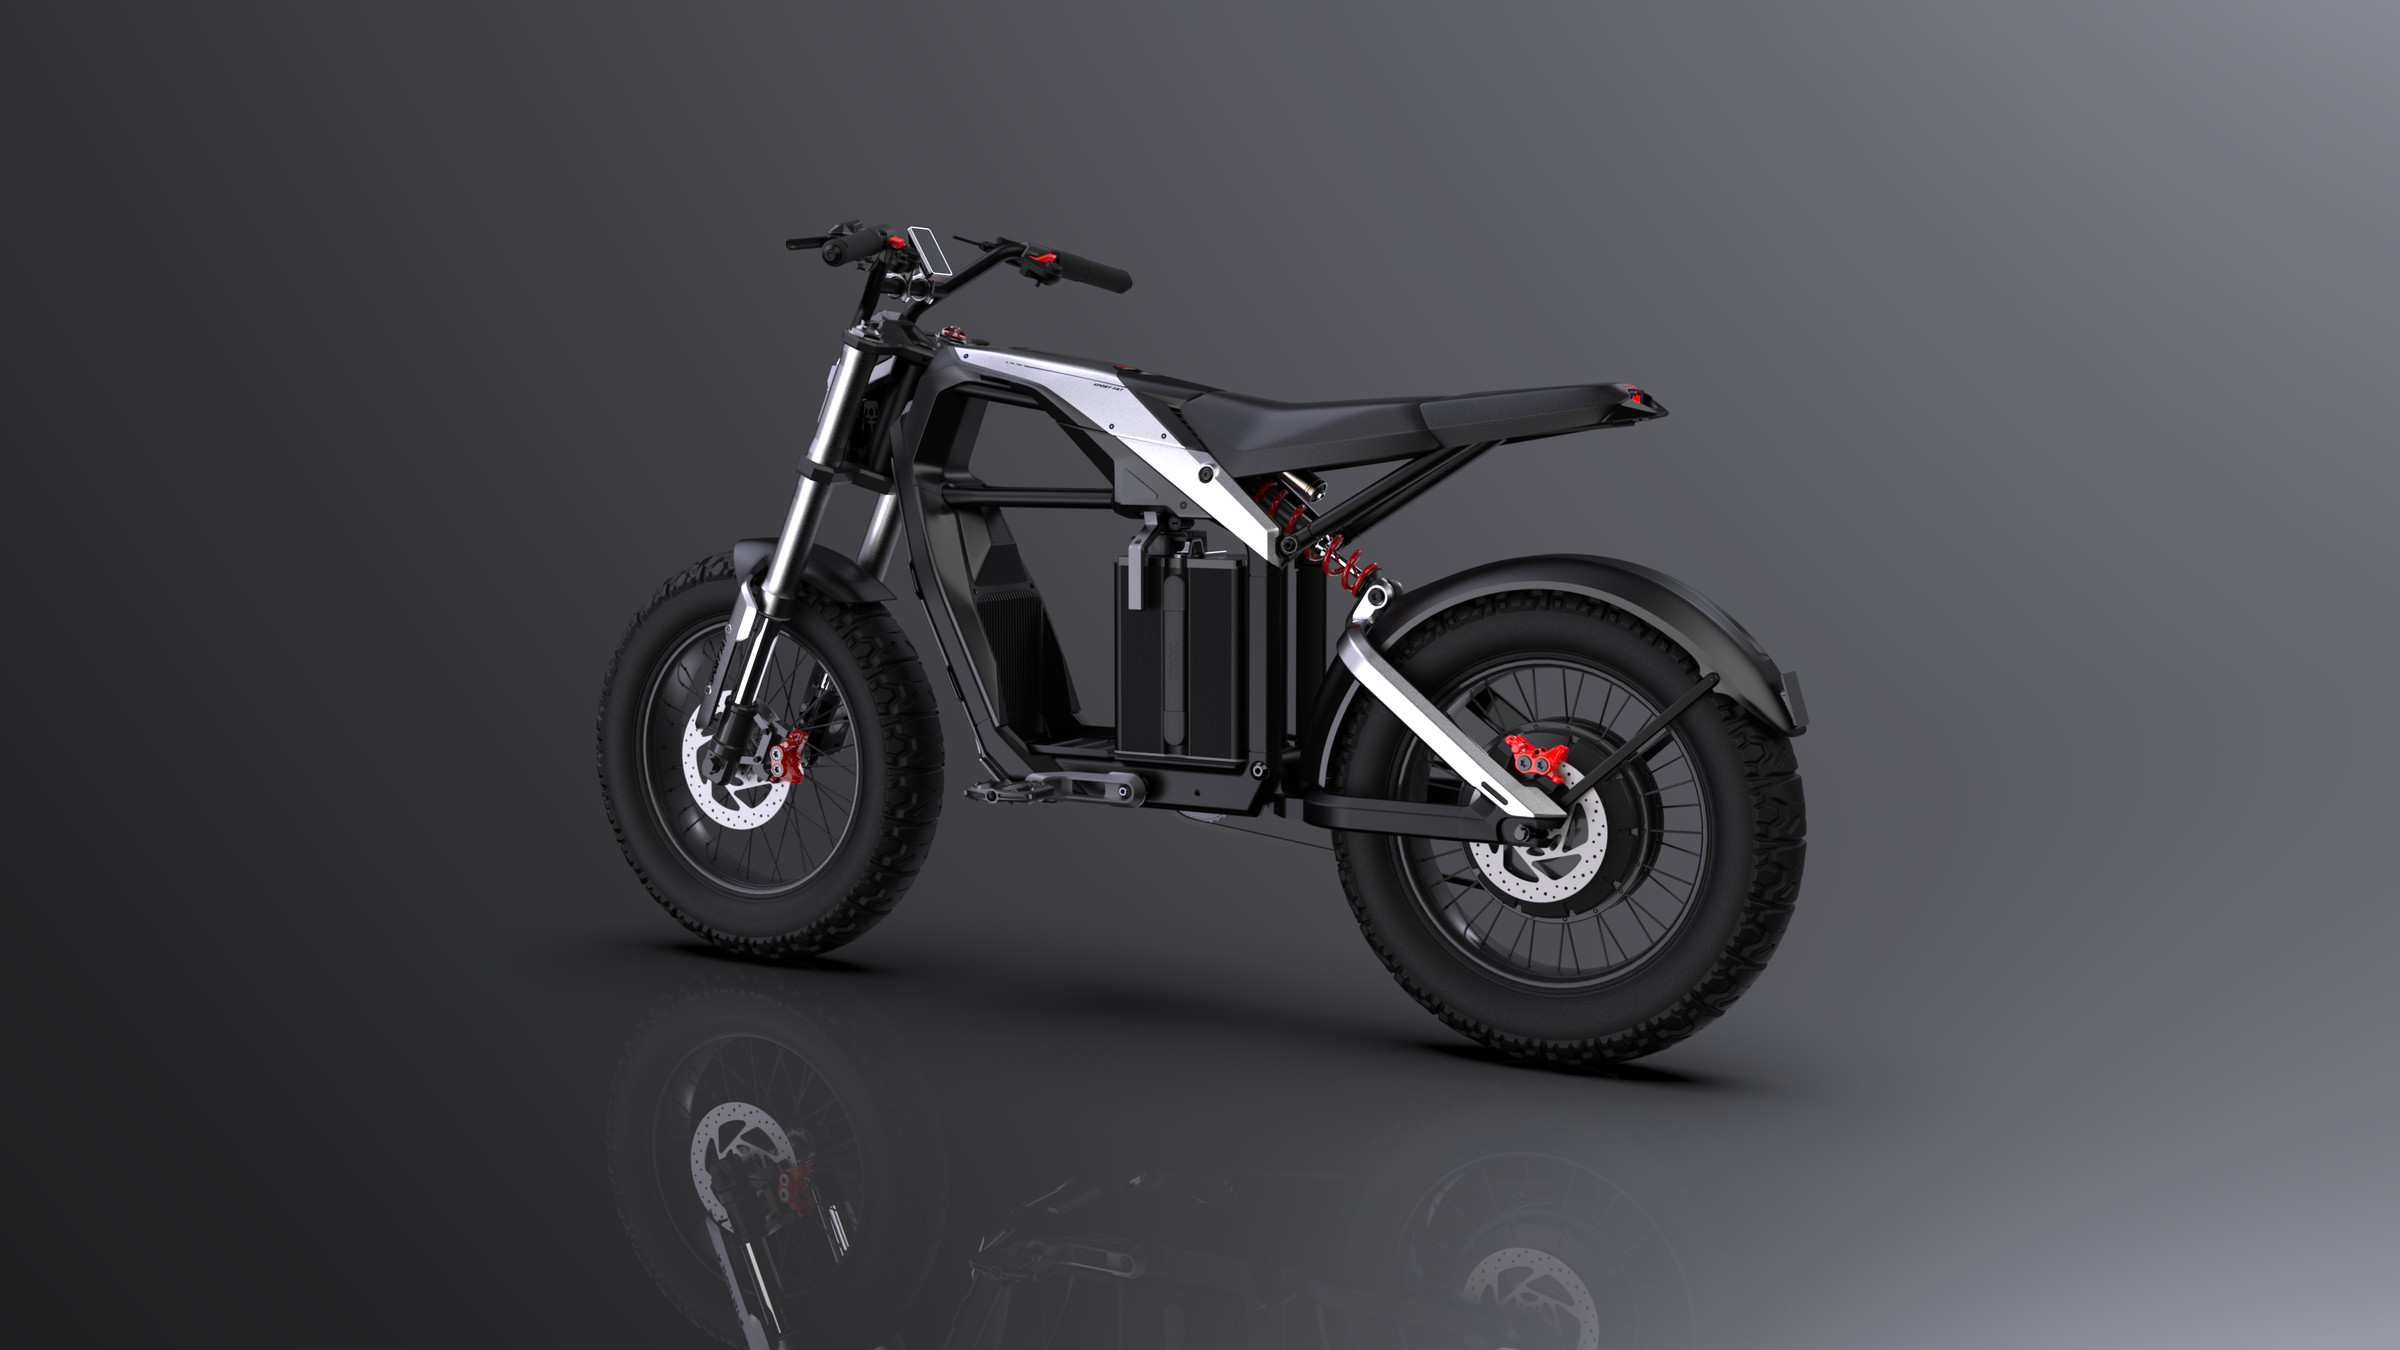 <em>The Xyber has 175Nm torque with a top speed of 19.8 mph, getting there in 2.5 seconds... presumably with the help of a throttle.</em>